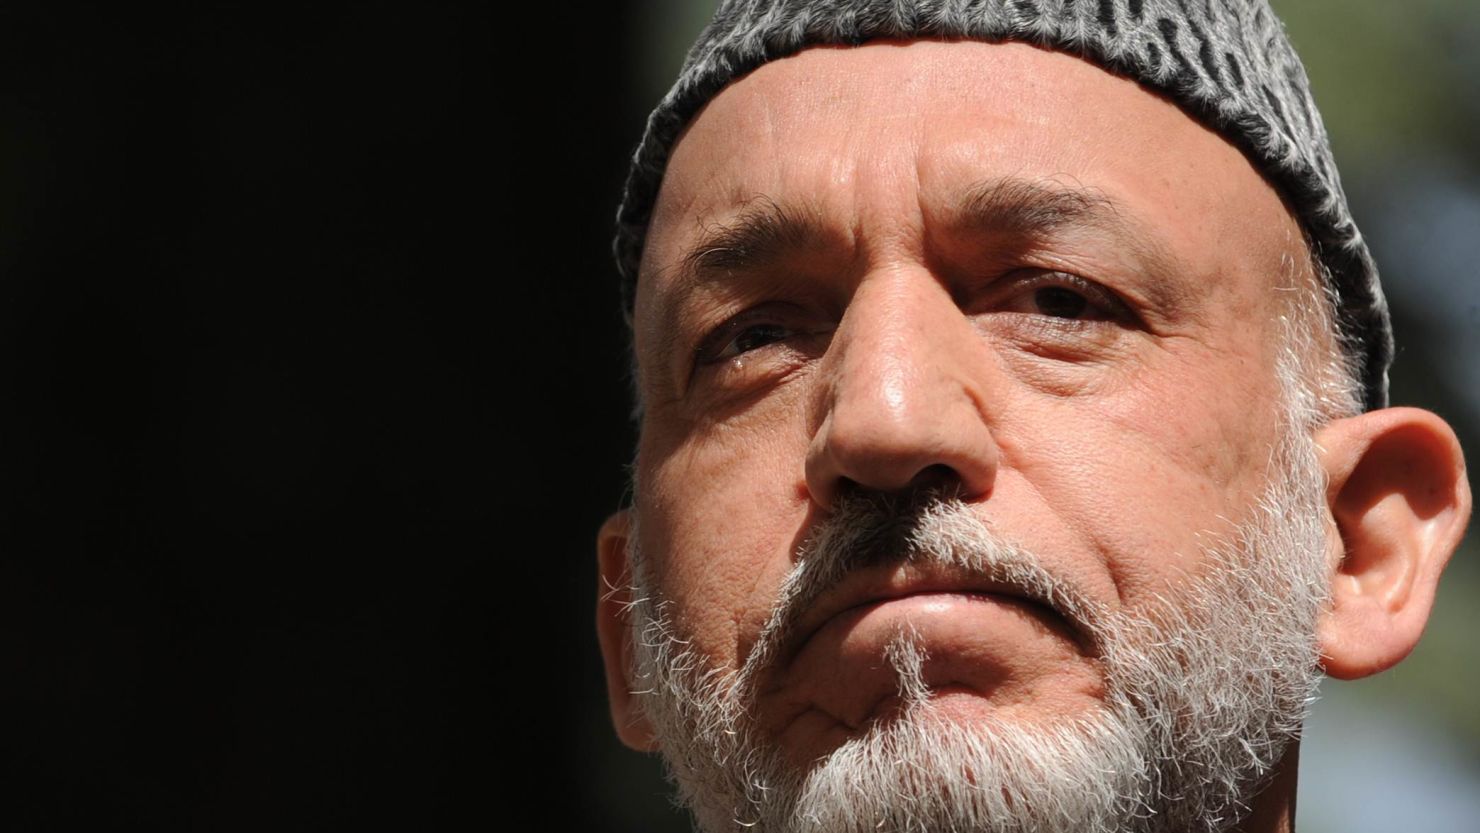 The conclusions of a meeting of tribal elders in Kabul next week will likely influence Afghan President Hamid Karzai.